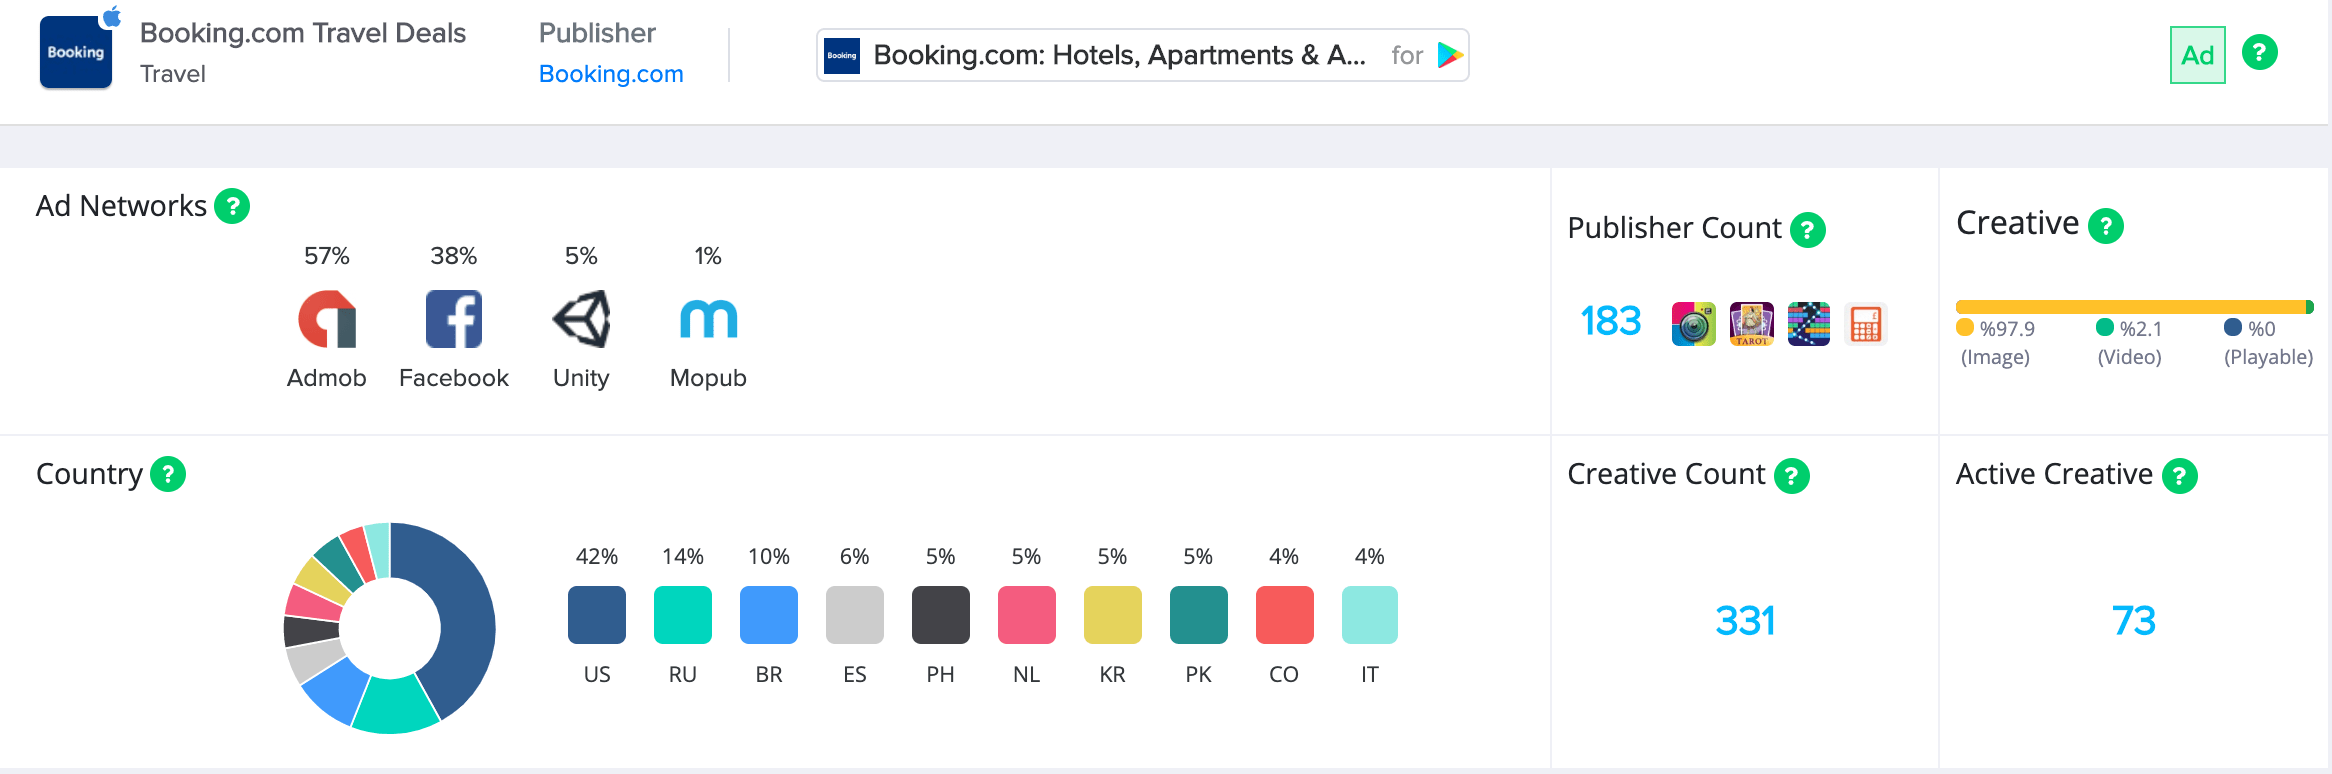 campaign analysis page of booking.com Mobile Action